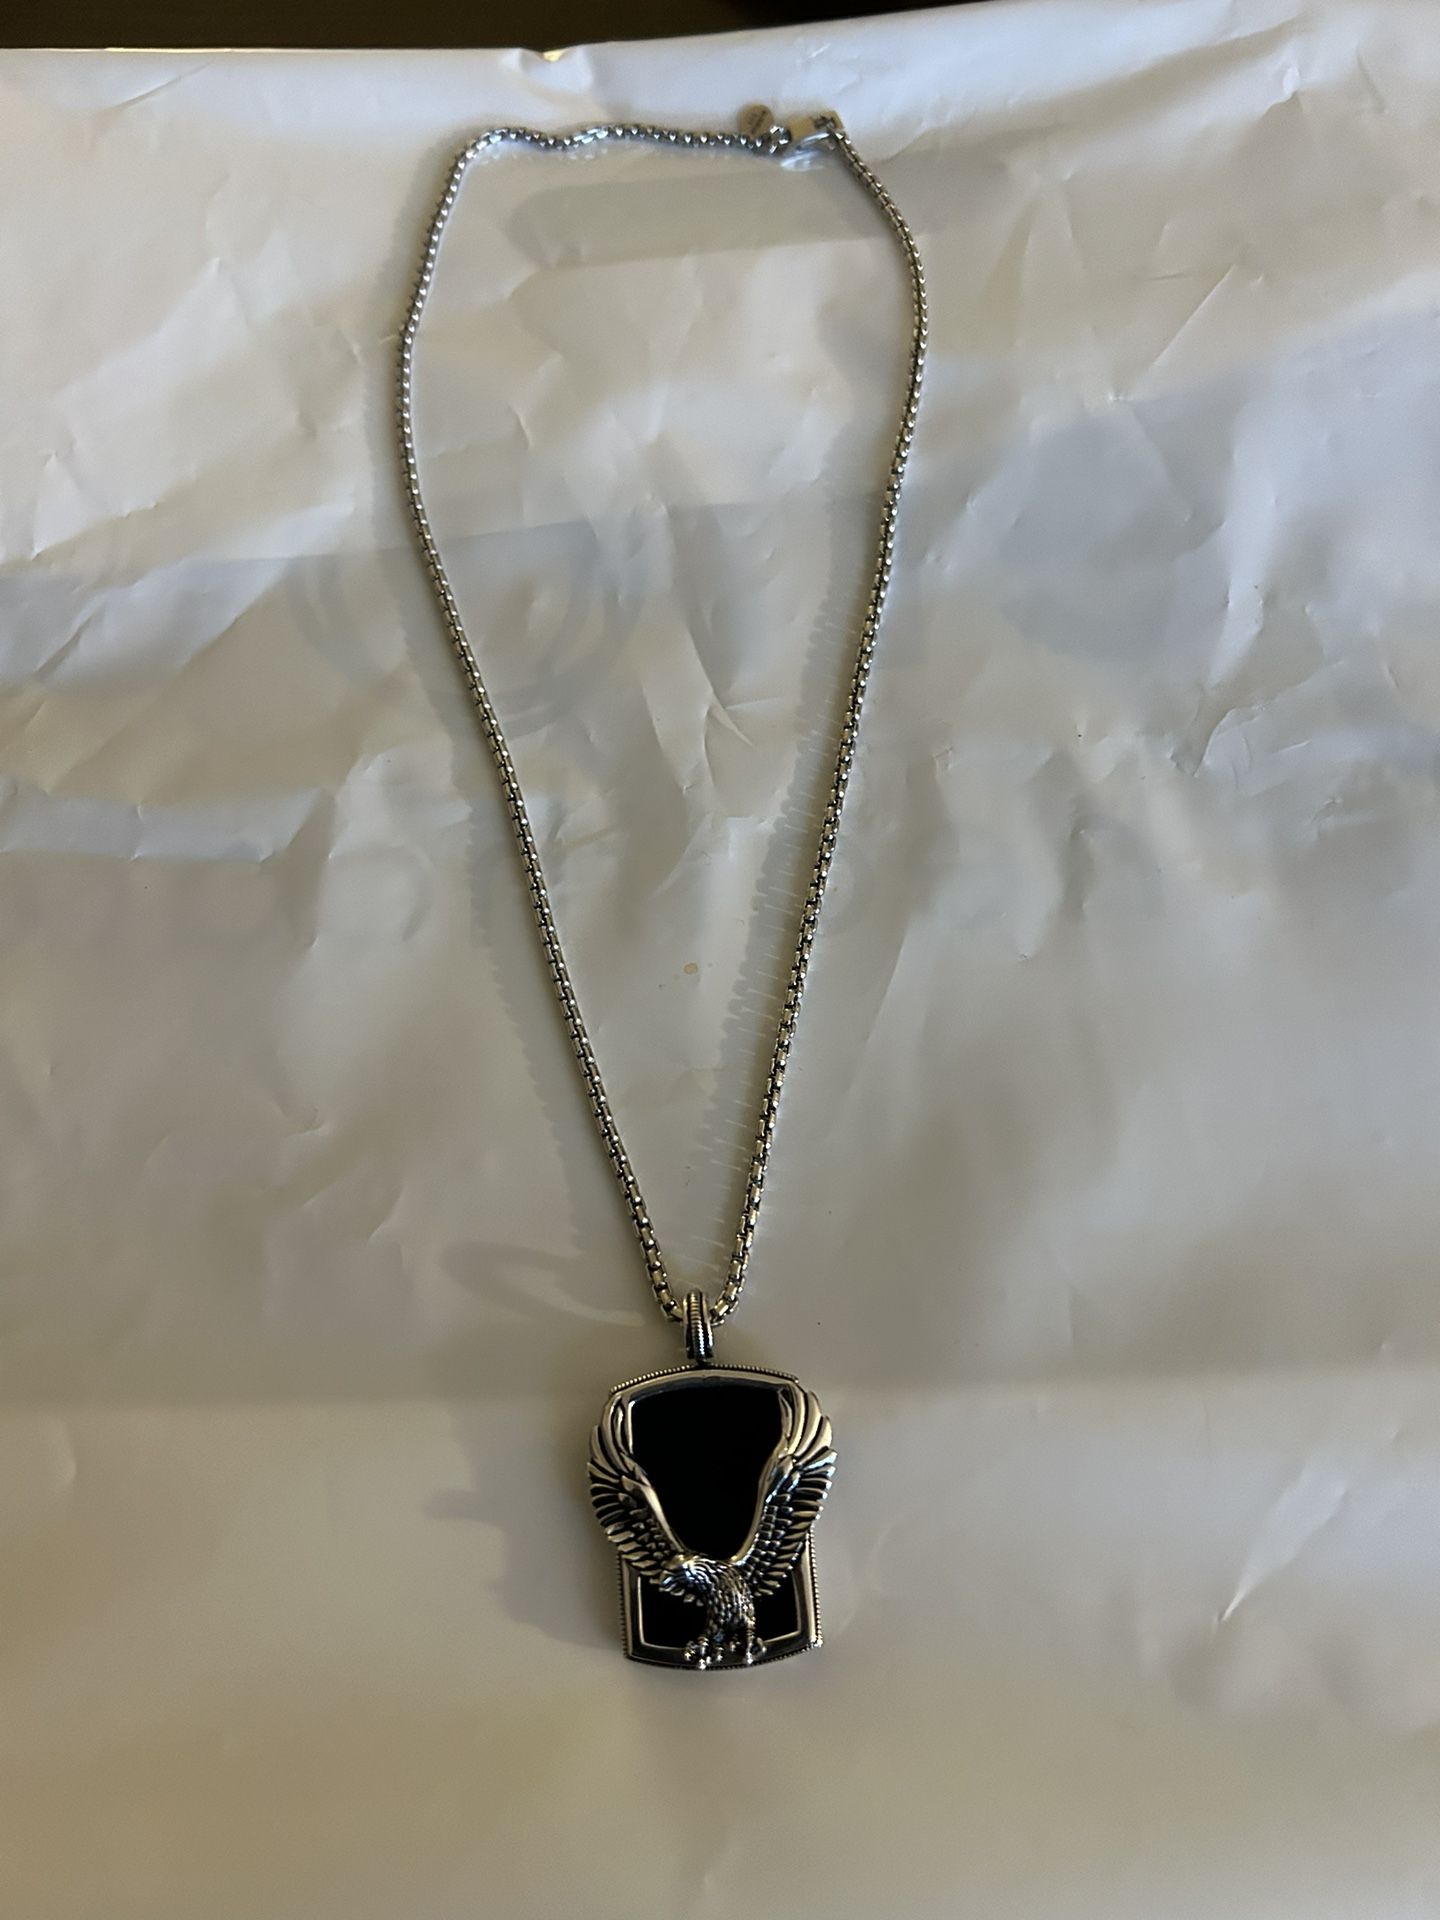 20” STERLING SILVER ONYX EFFY CHAIN WITH MEDALLION ON THE CLASP